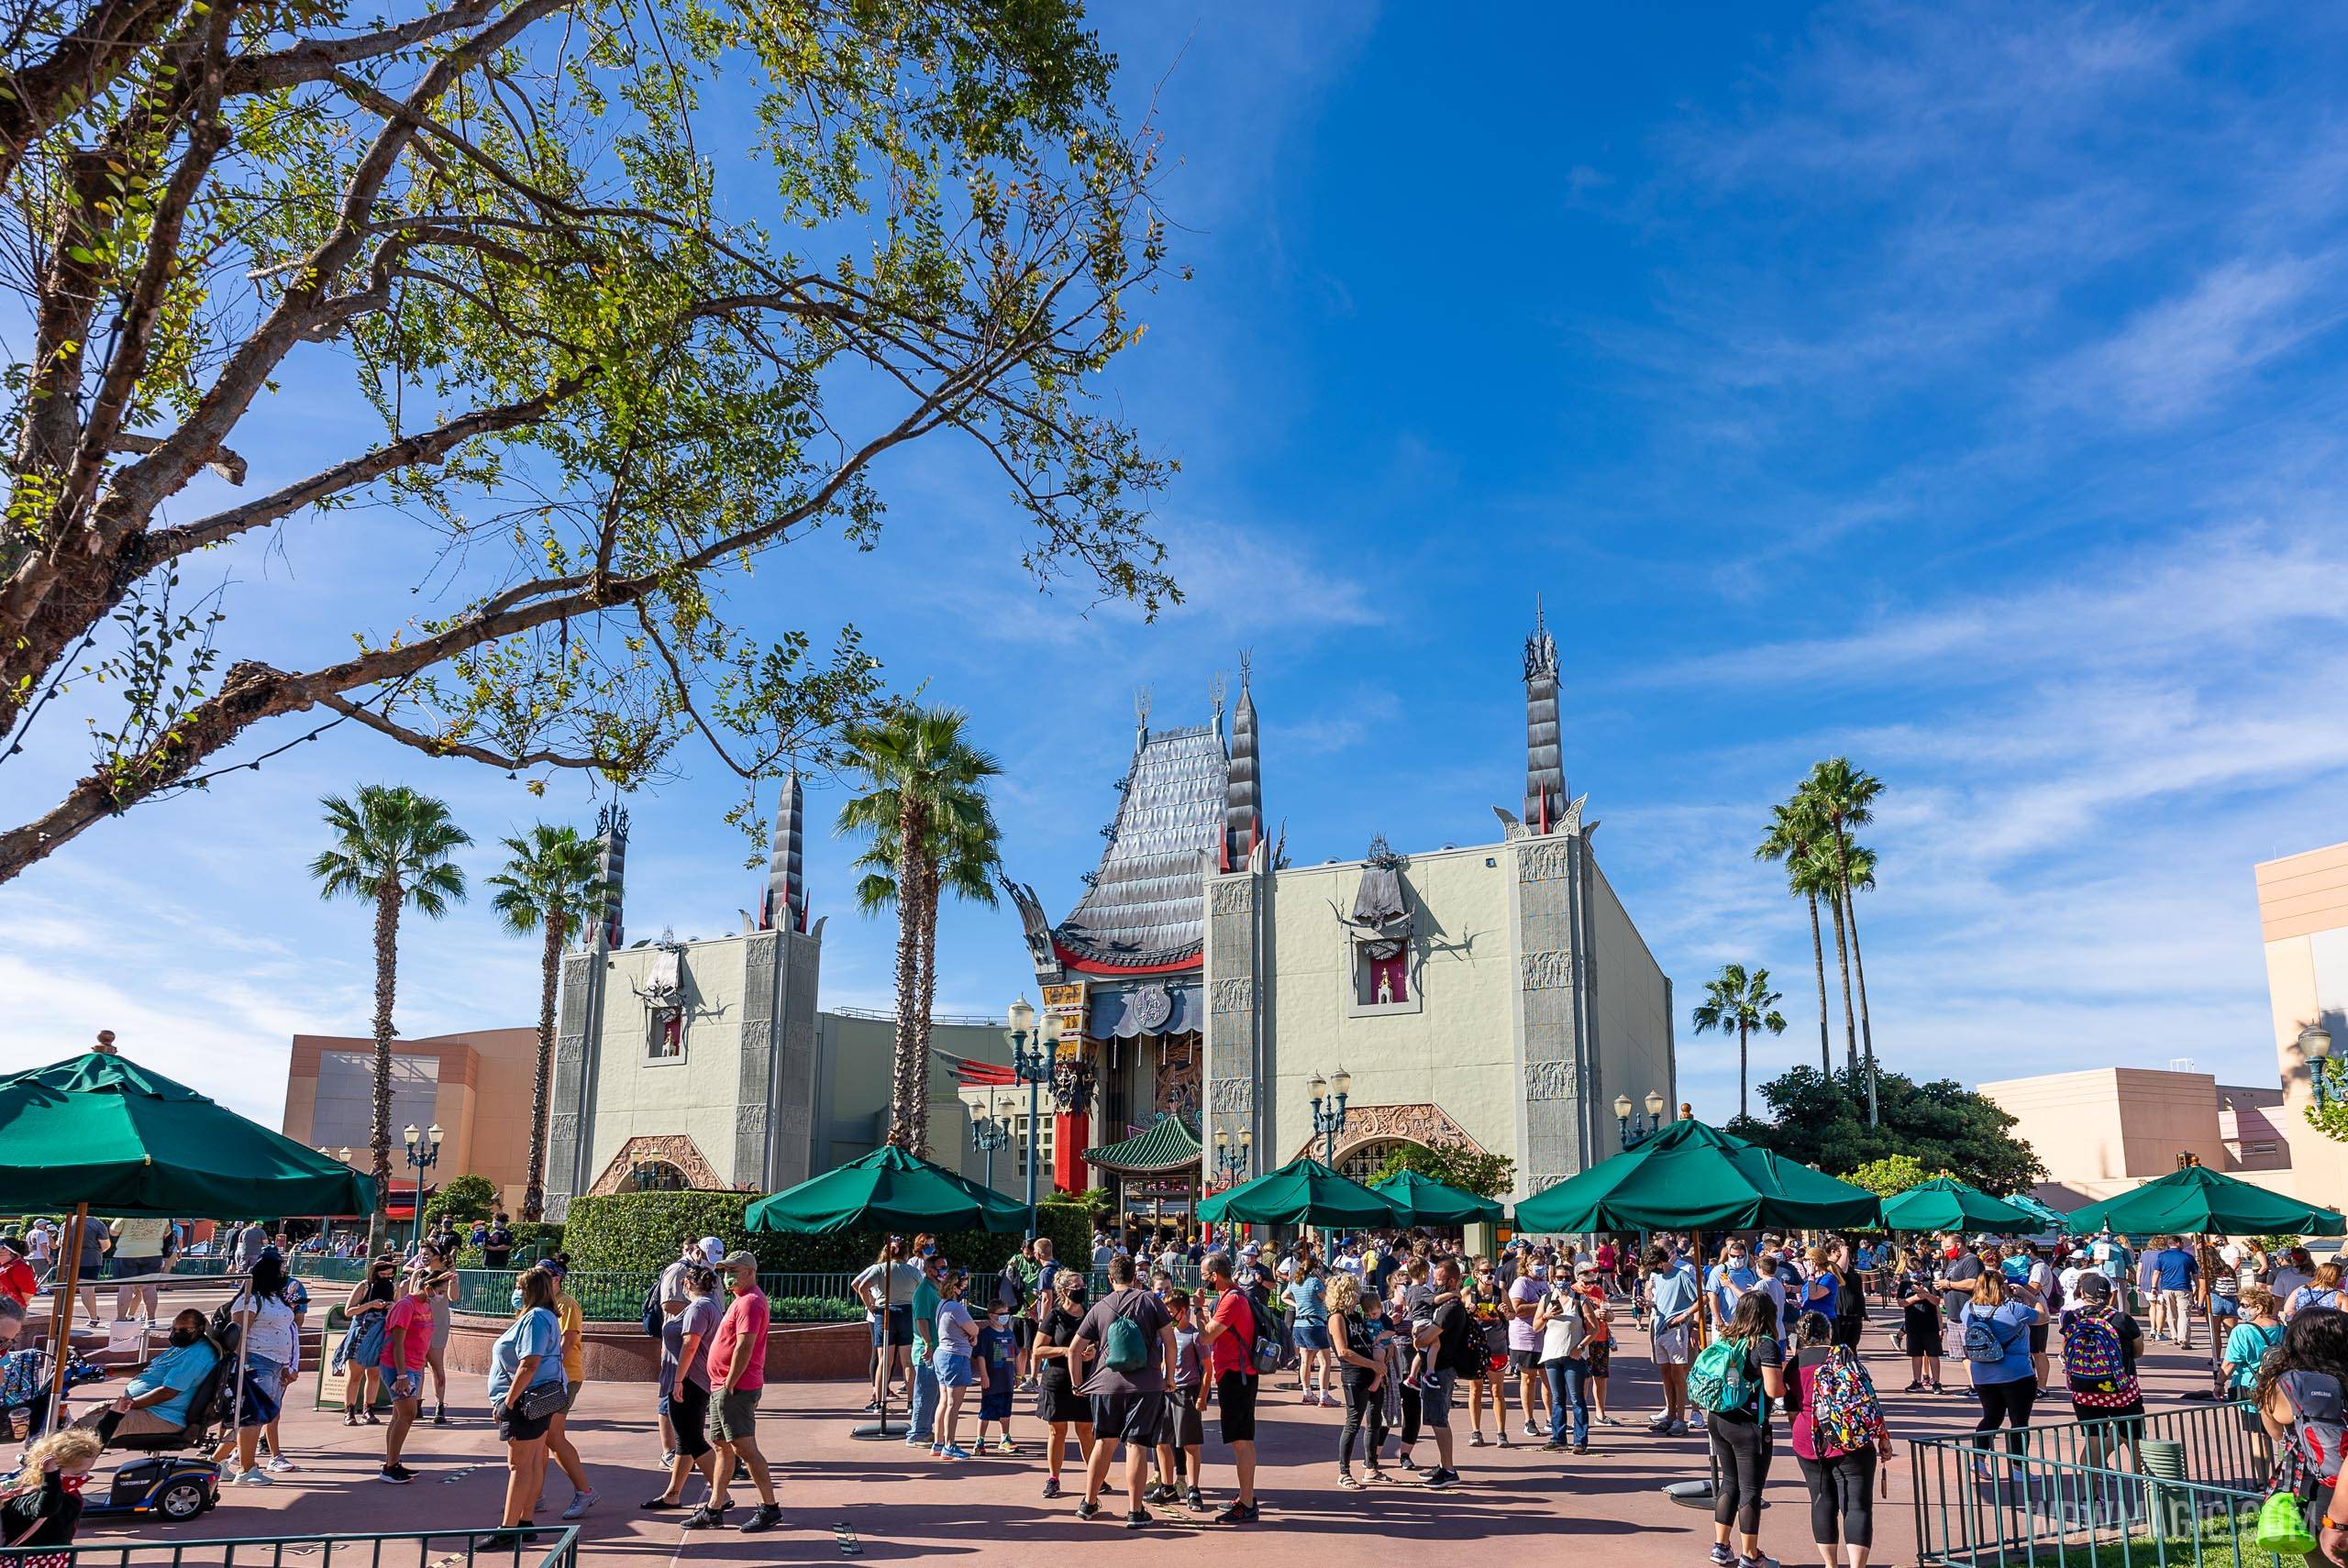 Attendance continues to rise at Walt Disney World theme parks